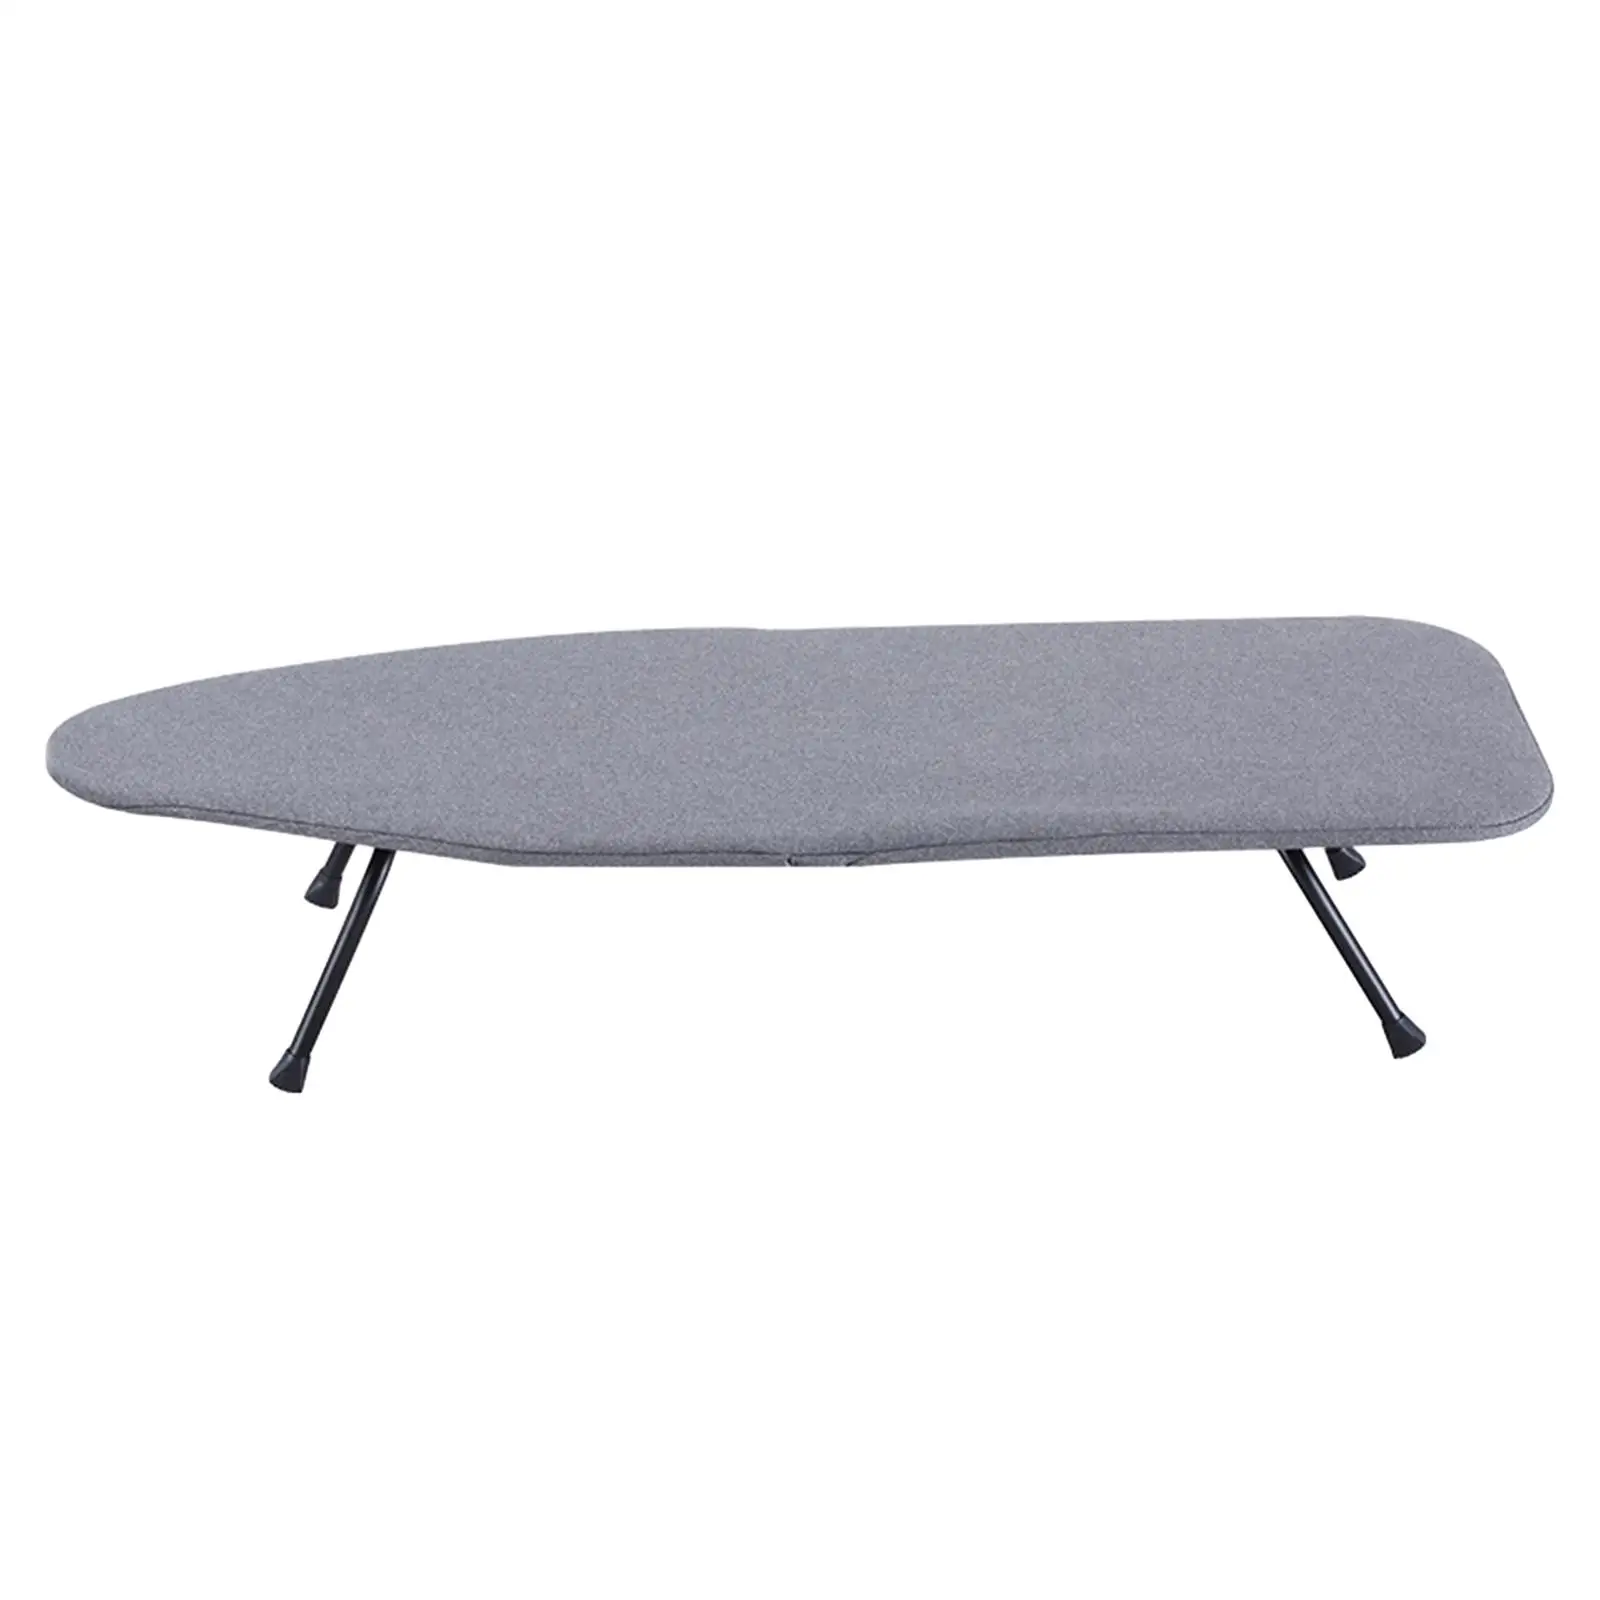 Tabletop Ironing Board Heavy Duty Ironing Table with Folding Legs Foldable